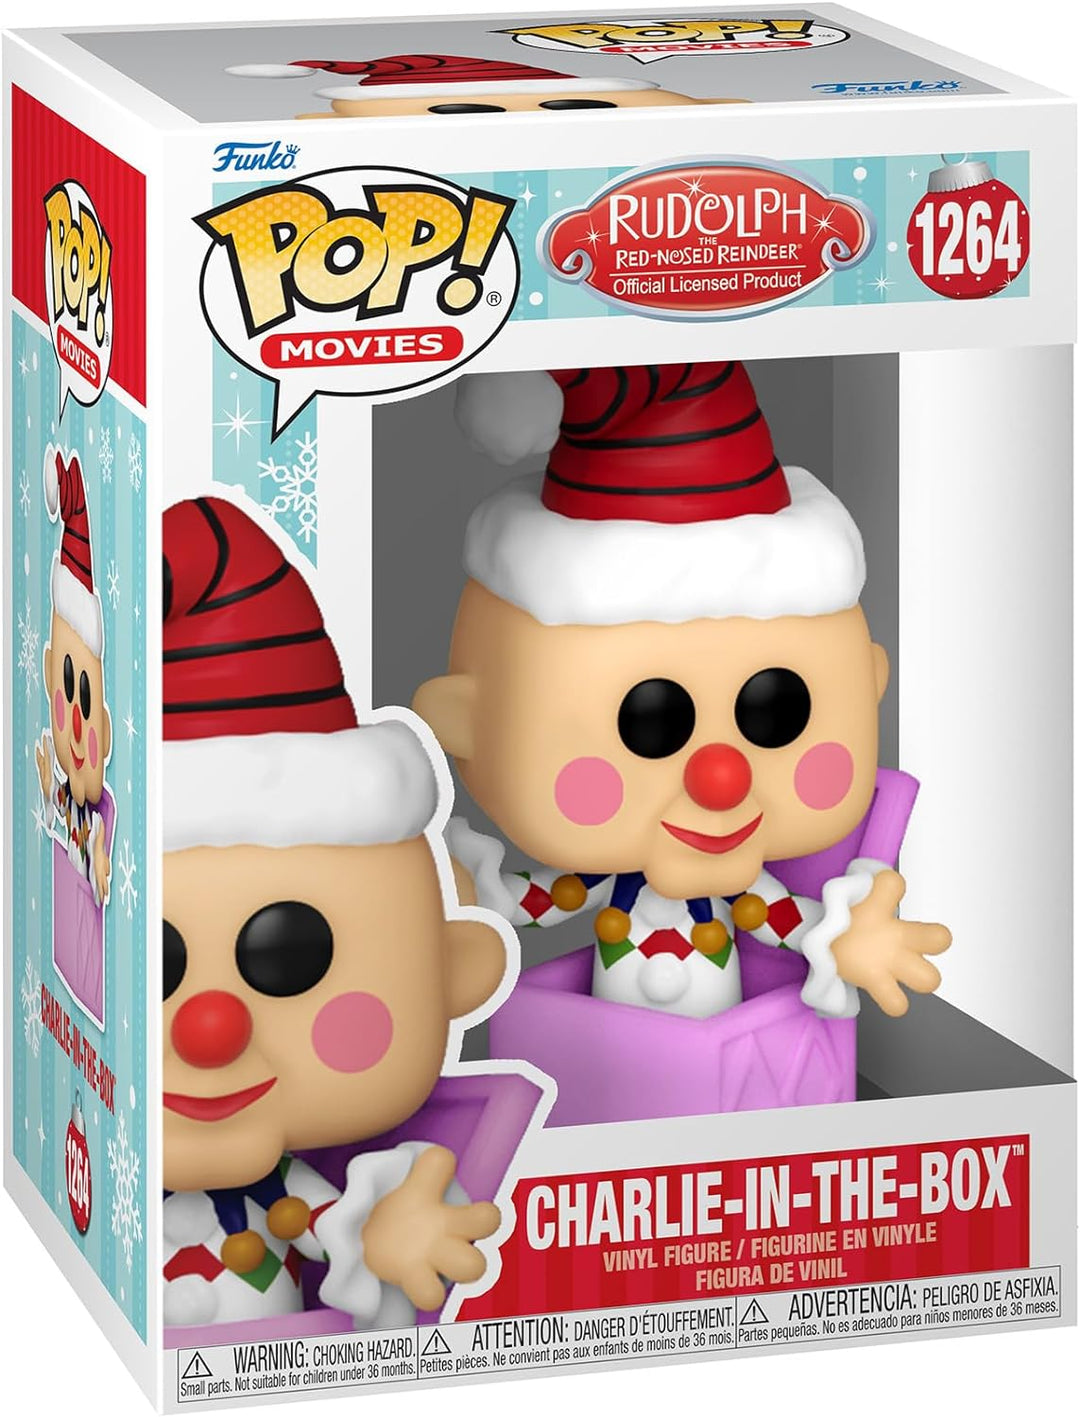 Funko POP! Movies: Rudolph - Misfit Elephant - Charlie In the Box - Rudolph the Red-Nosed Reindeer